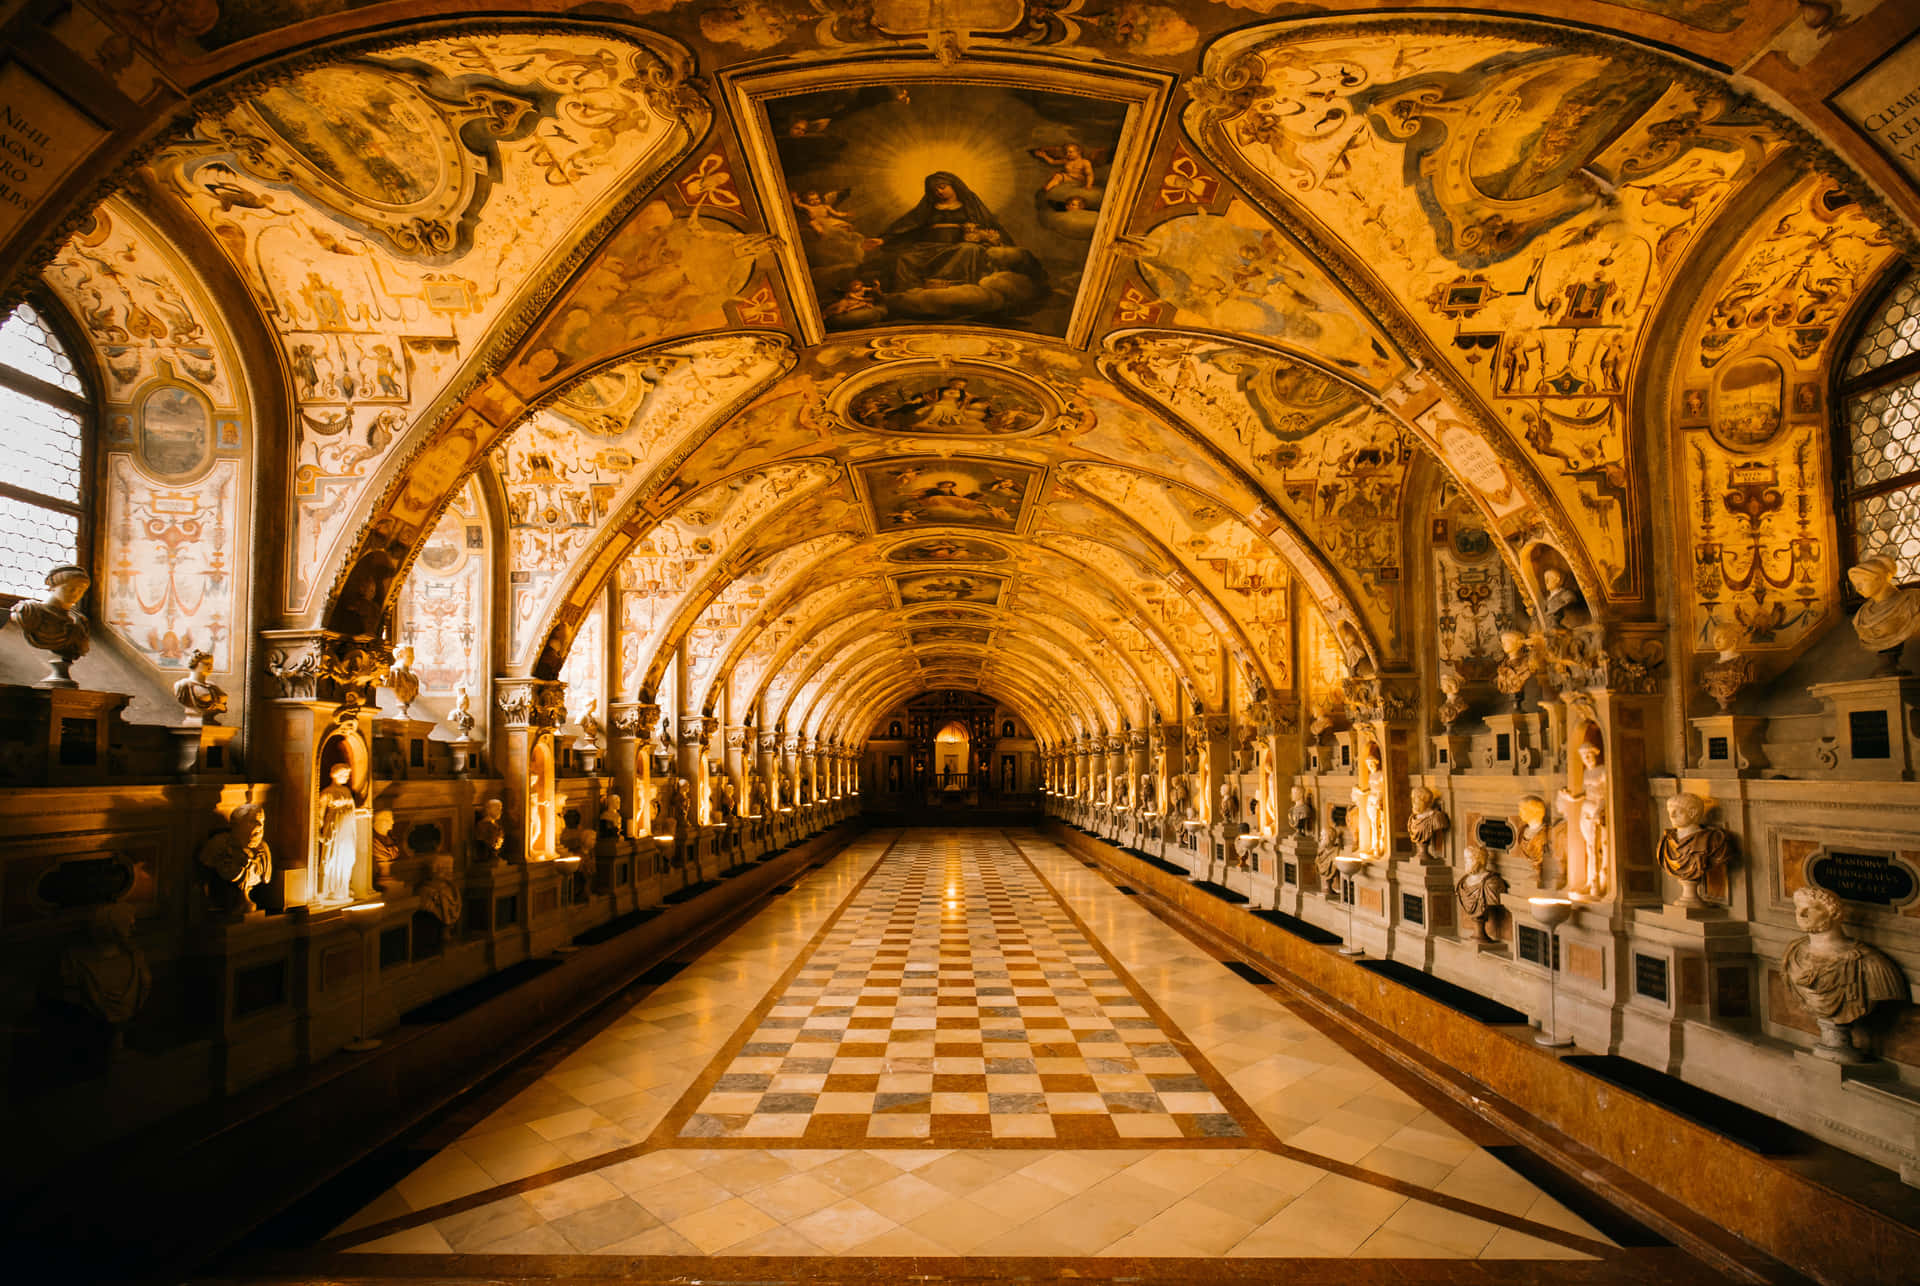 A Hallway With Ornate Paintings And A Checkered Floor